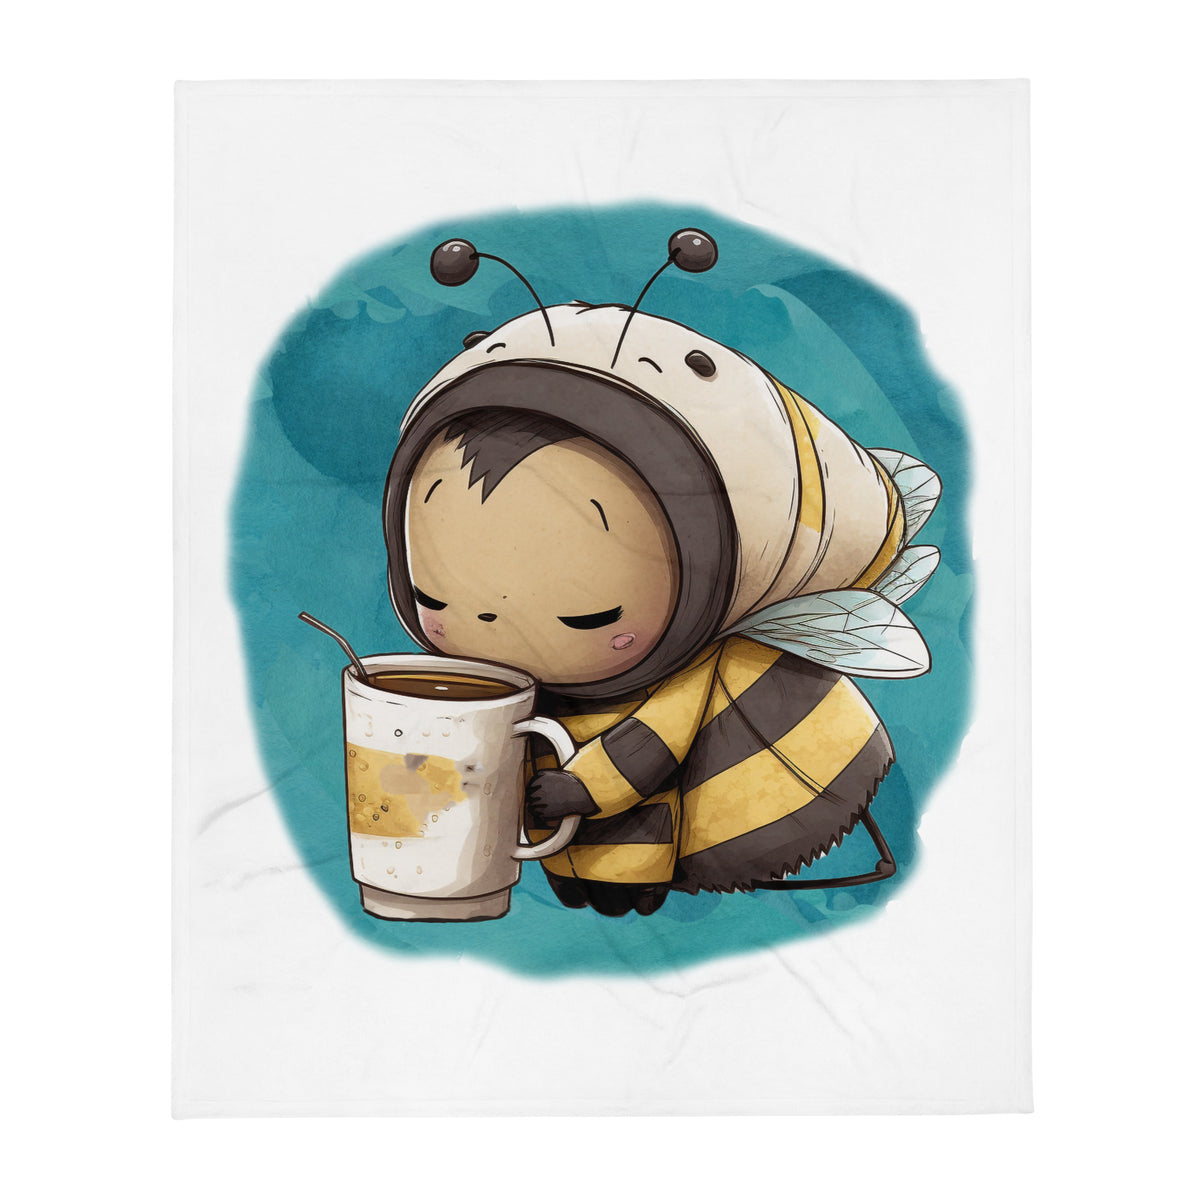 Sleepy bee 100% Polyester Soft Silk Touch Fabric Throw Blanket - Cozy, Durable and Adorable